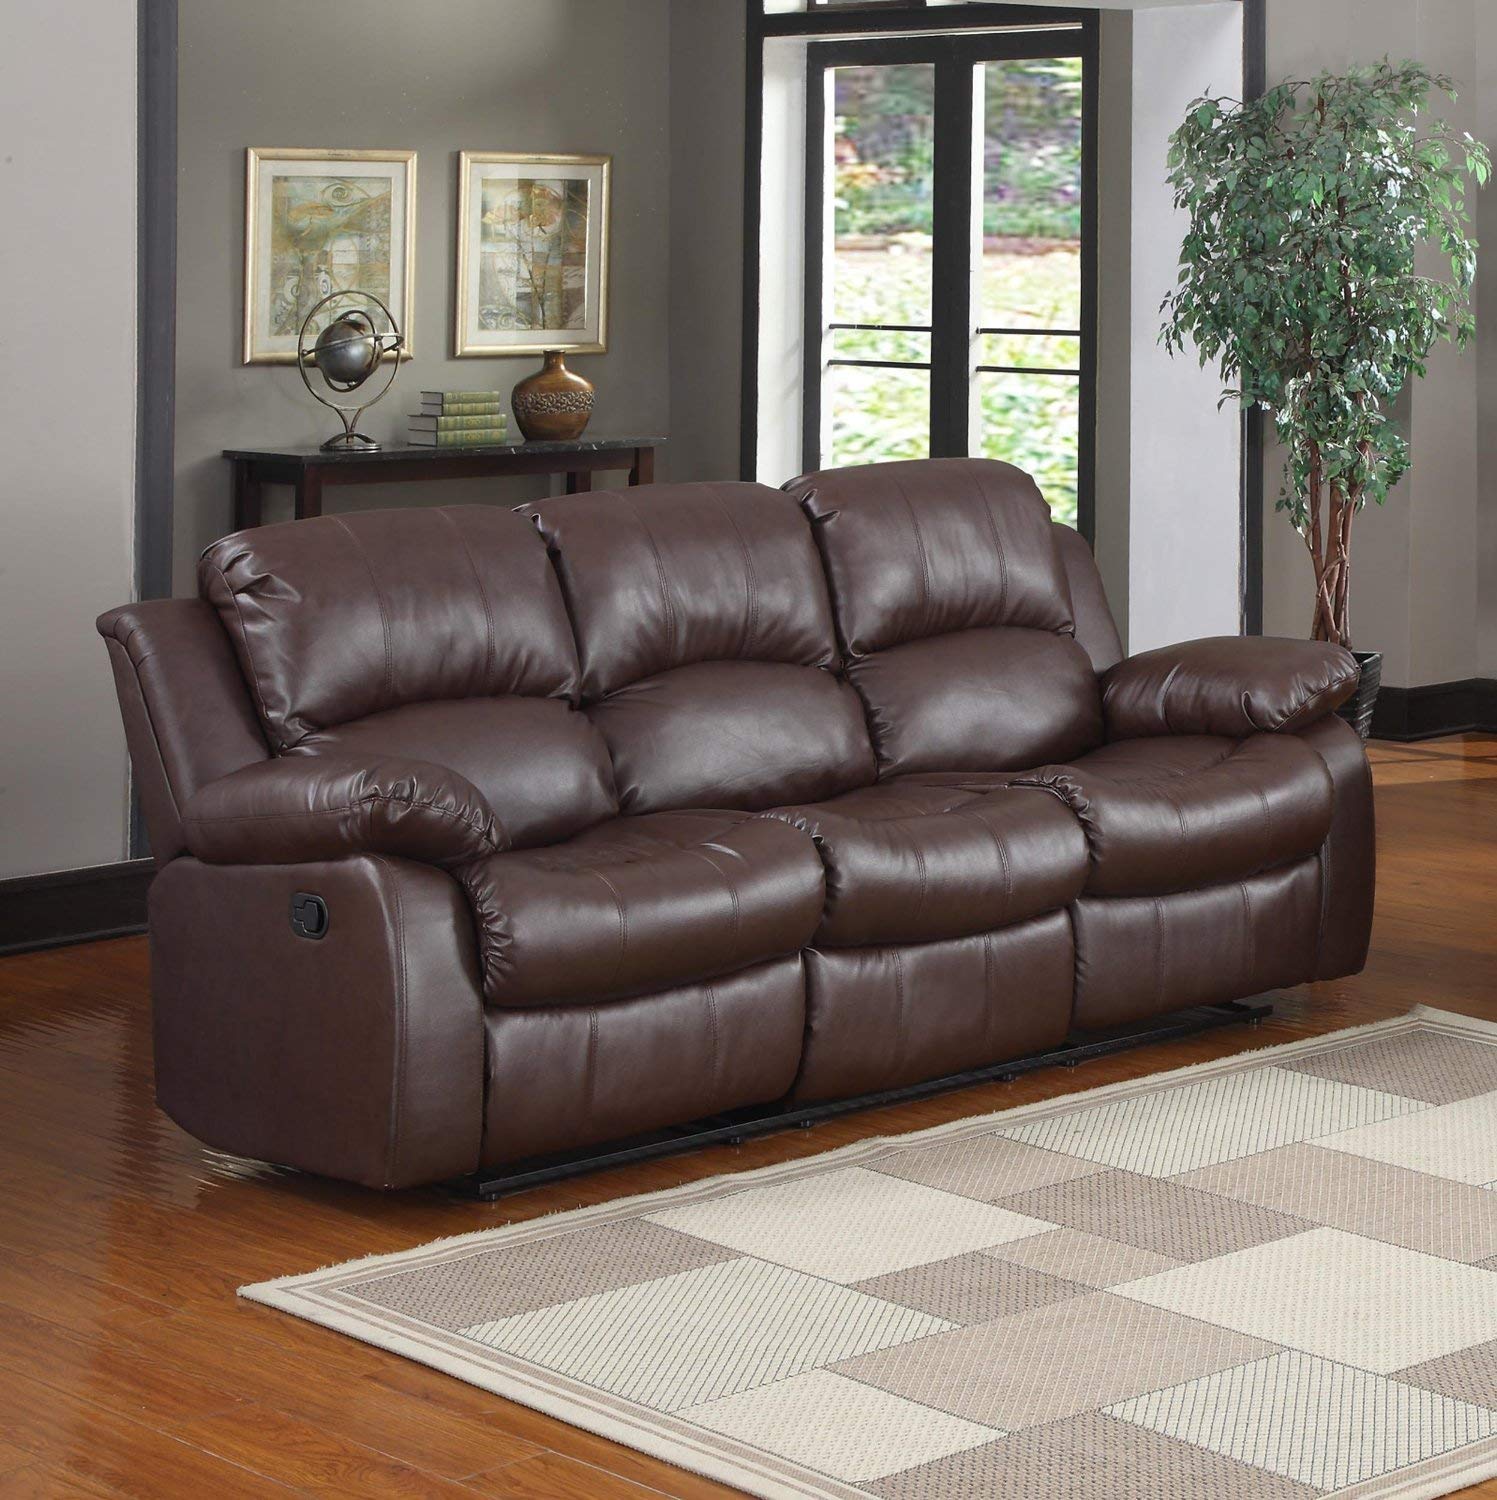 How to choose leather reclining sofa